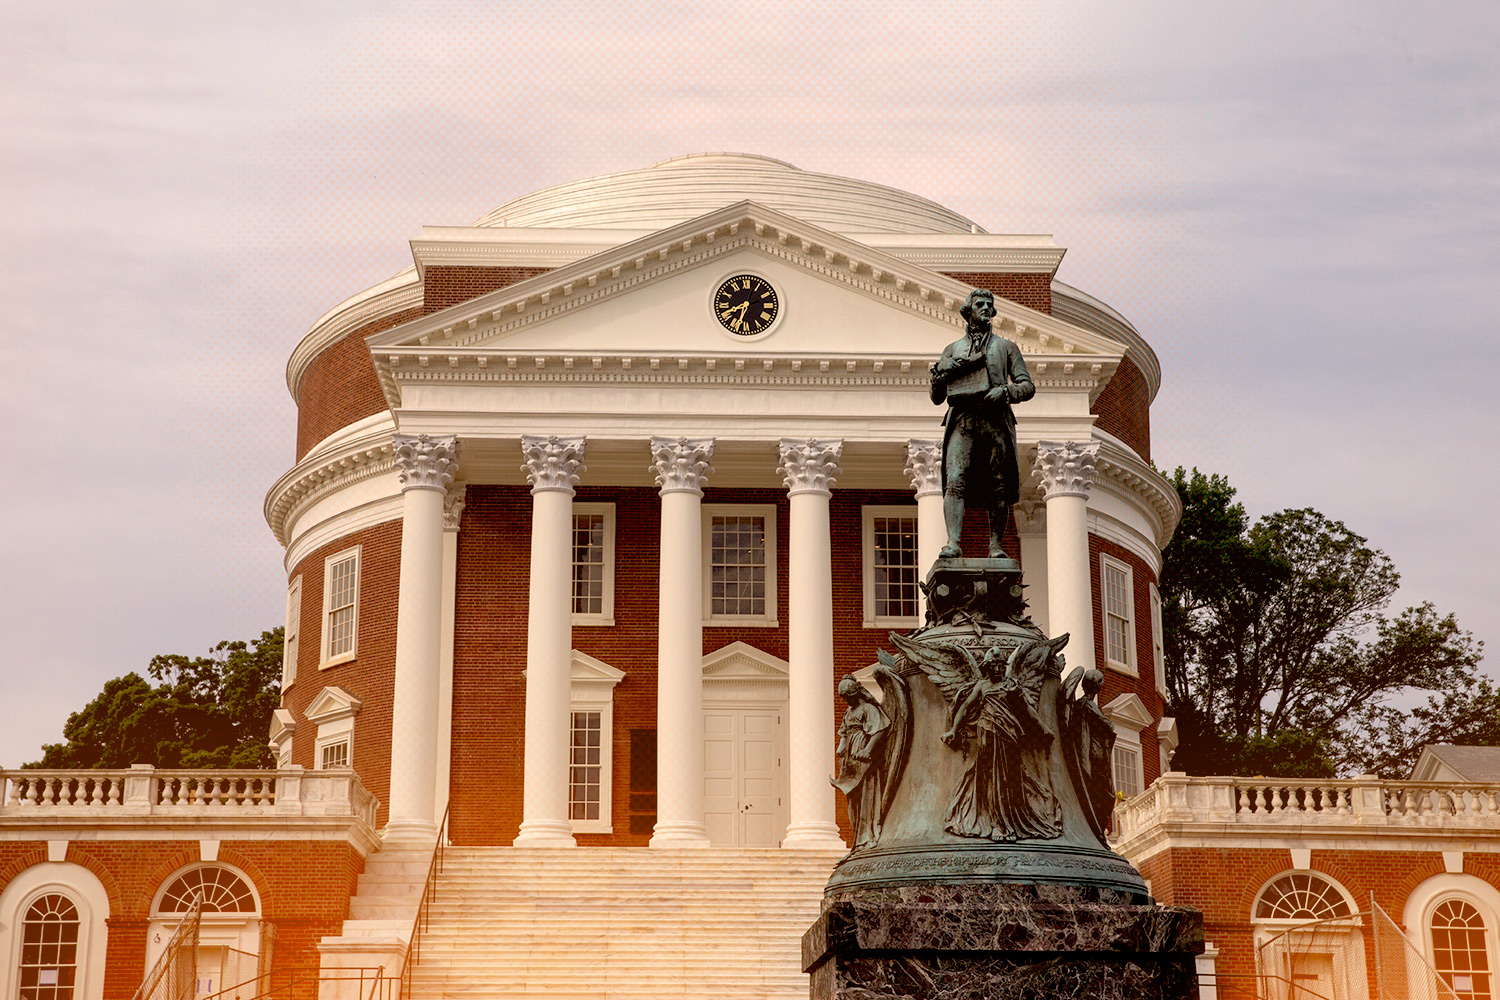 The Rotunda and Thomas Jeffersons statue in front